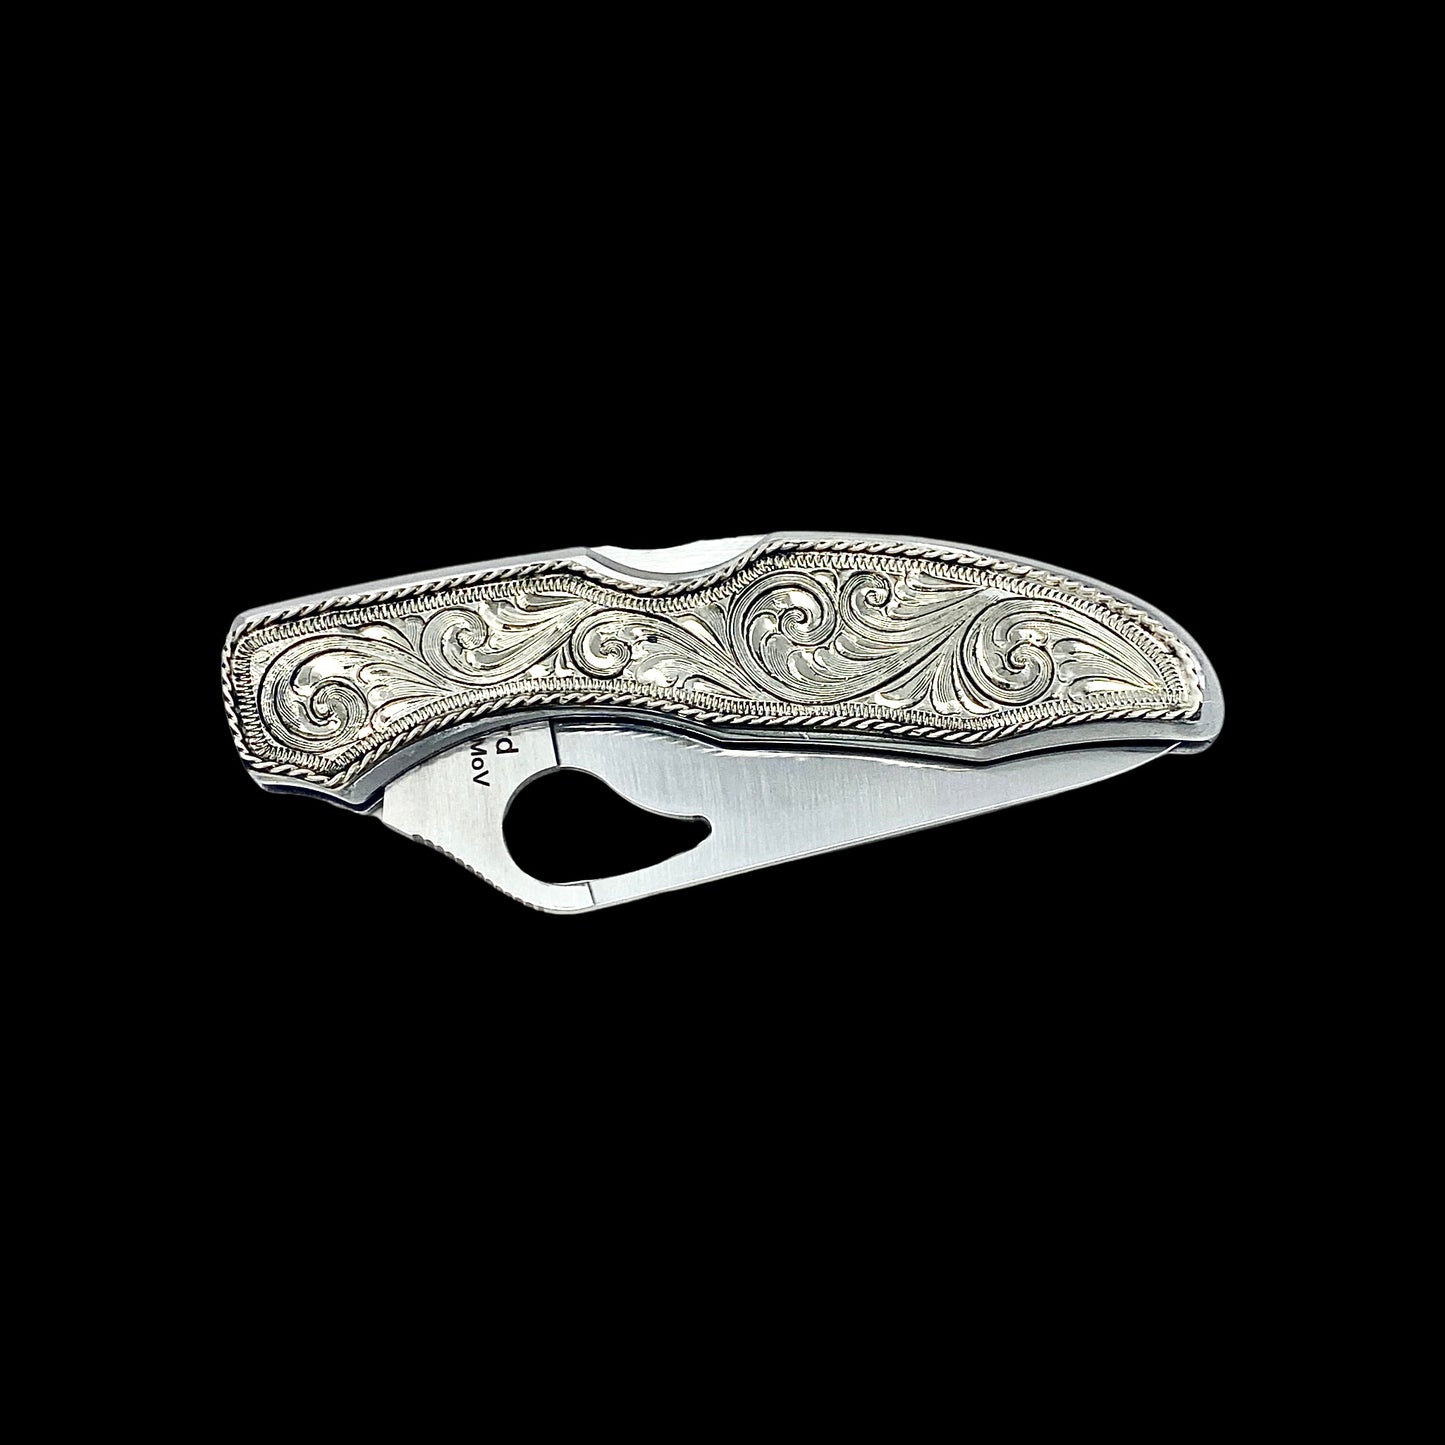 The Classic Roper Engraved Knife